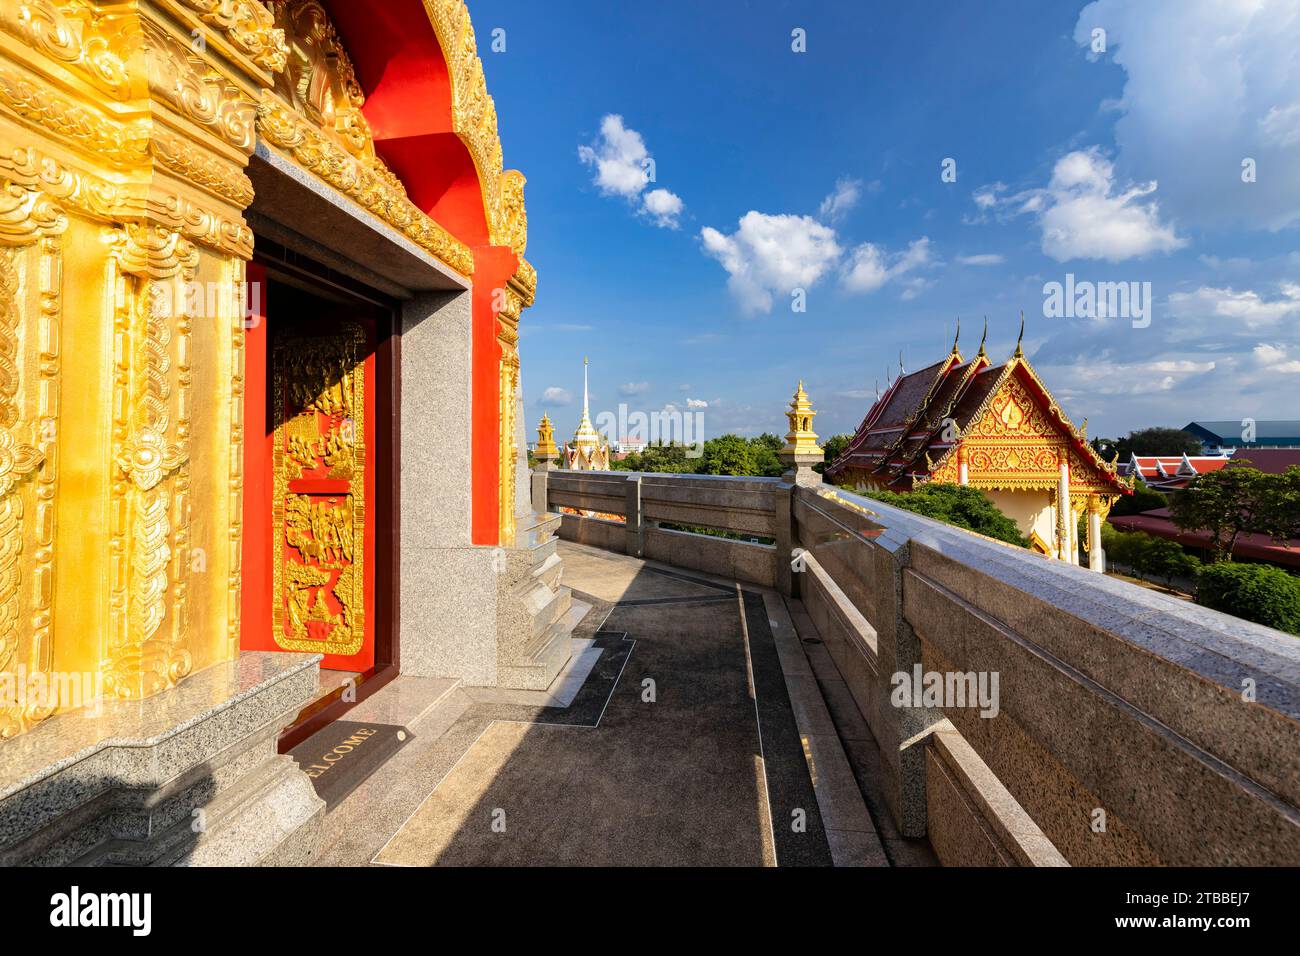 Wat Phothisomphon(Wat Pothisomphon, Wat Phothisaphorn), pagoda and view, city center, Udon Thani, Isan, Thailand, Southeast Asia, Asia Stock Photo